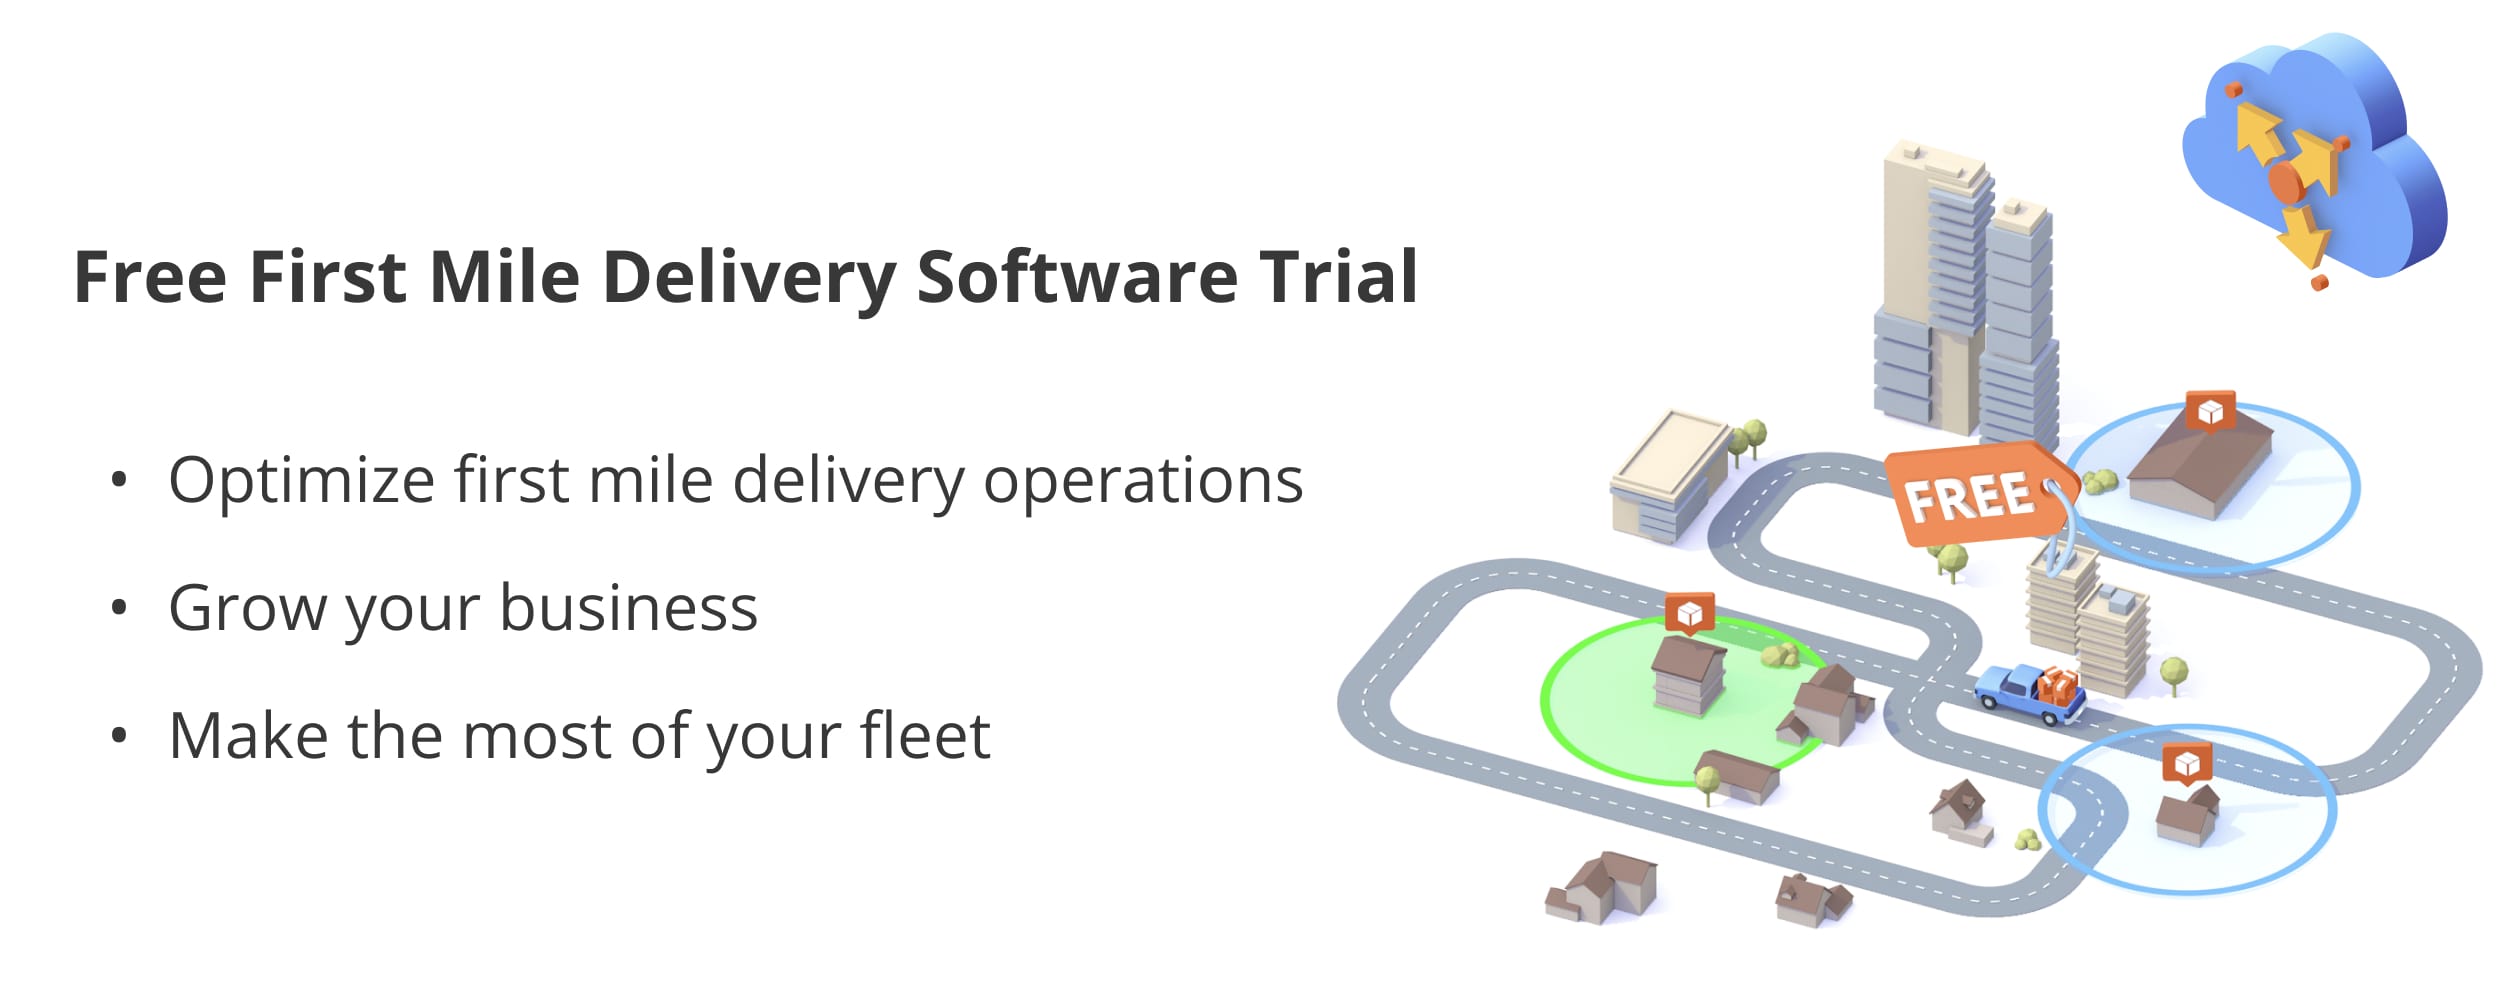 Try Route4Me's free first mile delivery software trial for a whole week without any cost.